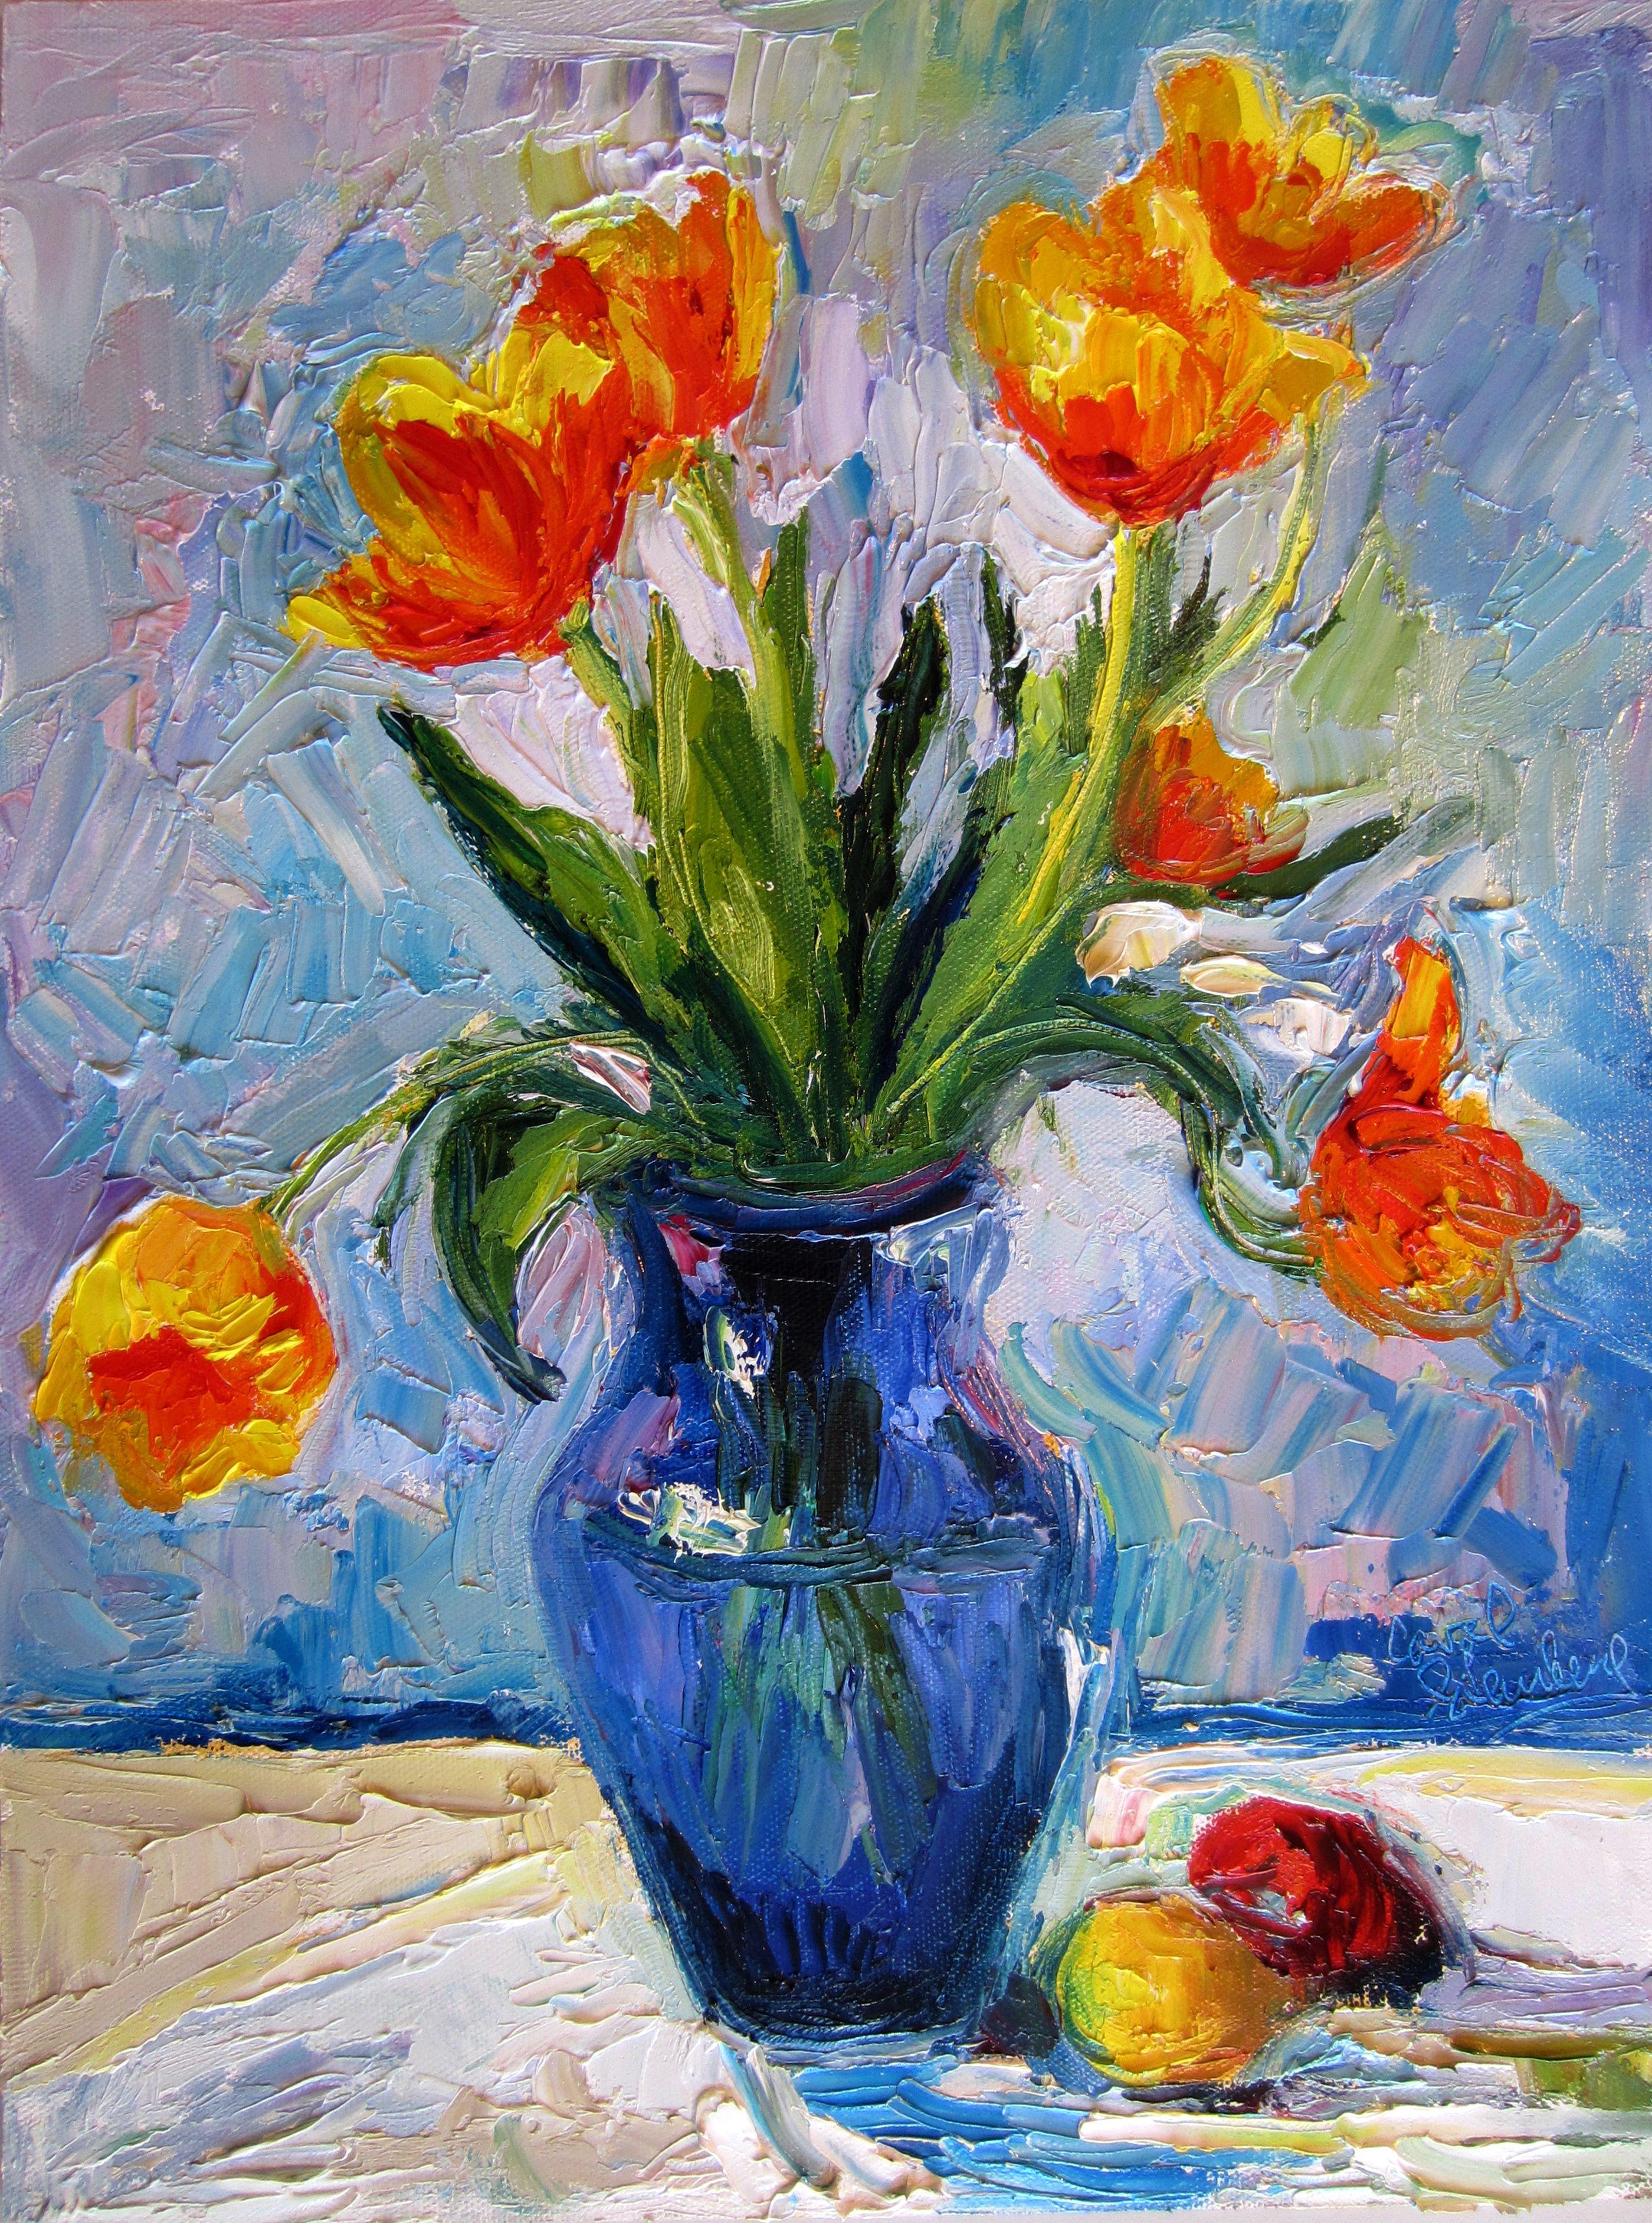 Exciting complementary colors sing in this impastoed floral :: Painting :: Impressionist :: This piece comes with an official certificate of authenticity signed by the artist :: Ready to Hang: No :: Signed: Yes :: Signature Location: lower right and